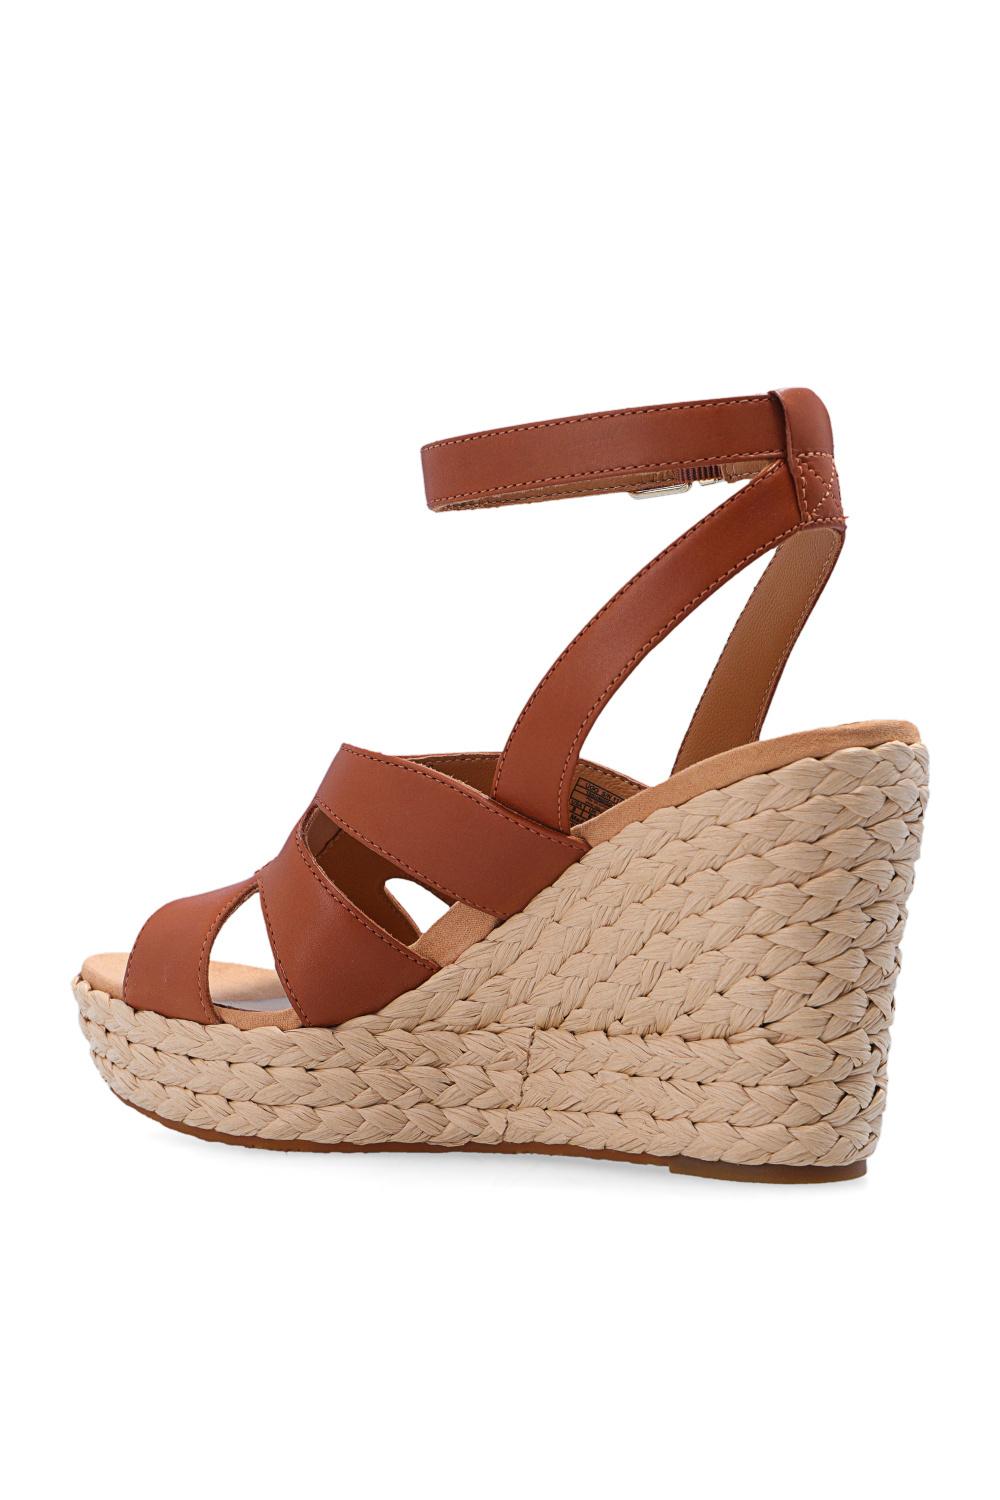 UGG Leather 'careena' Wedge Sandals in Brown | Lyst